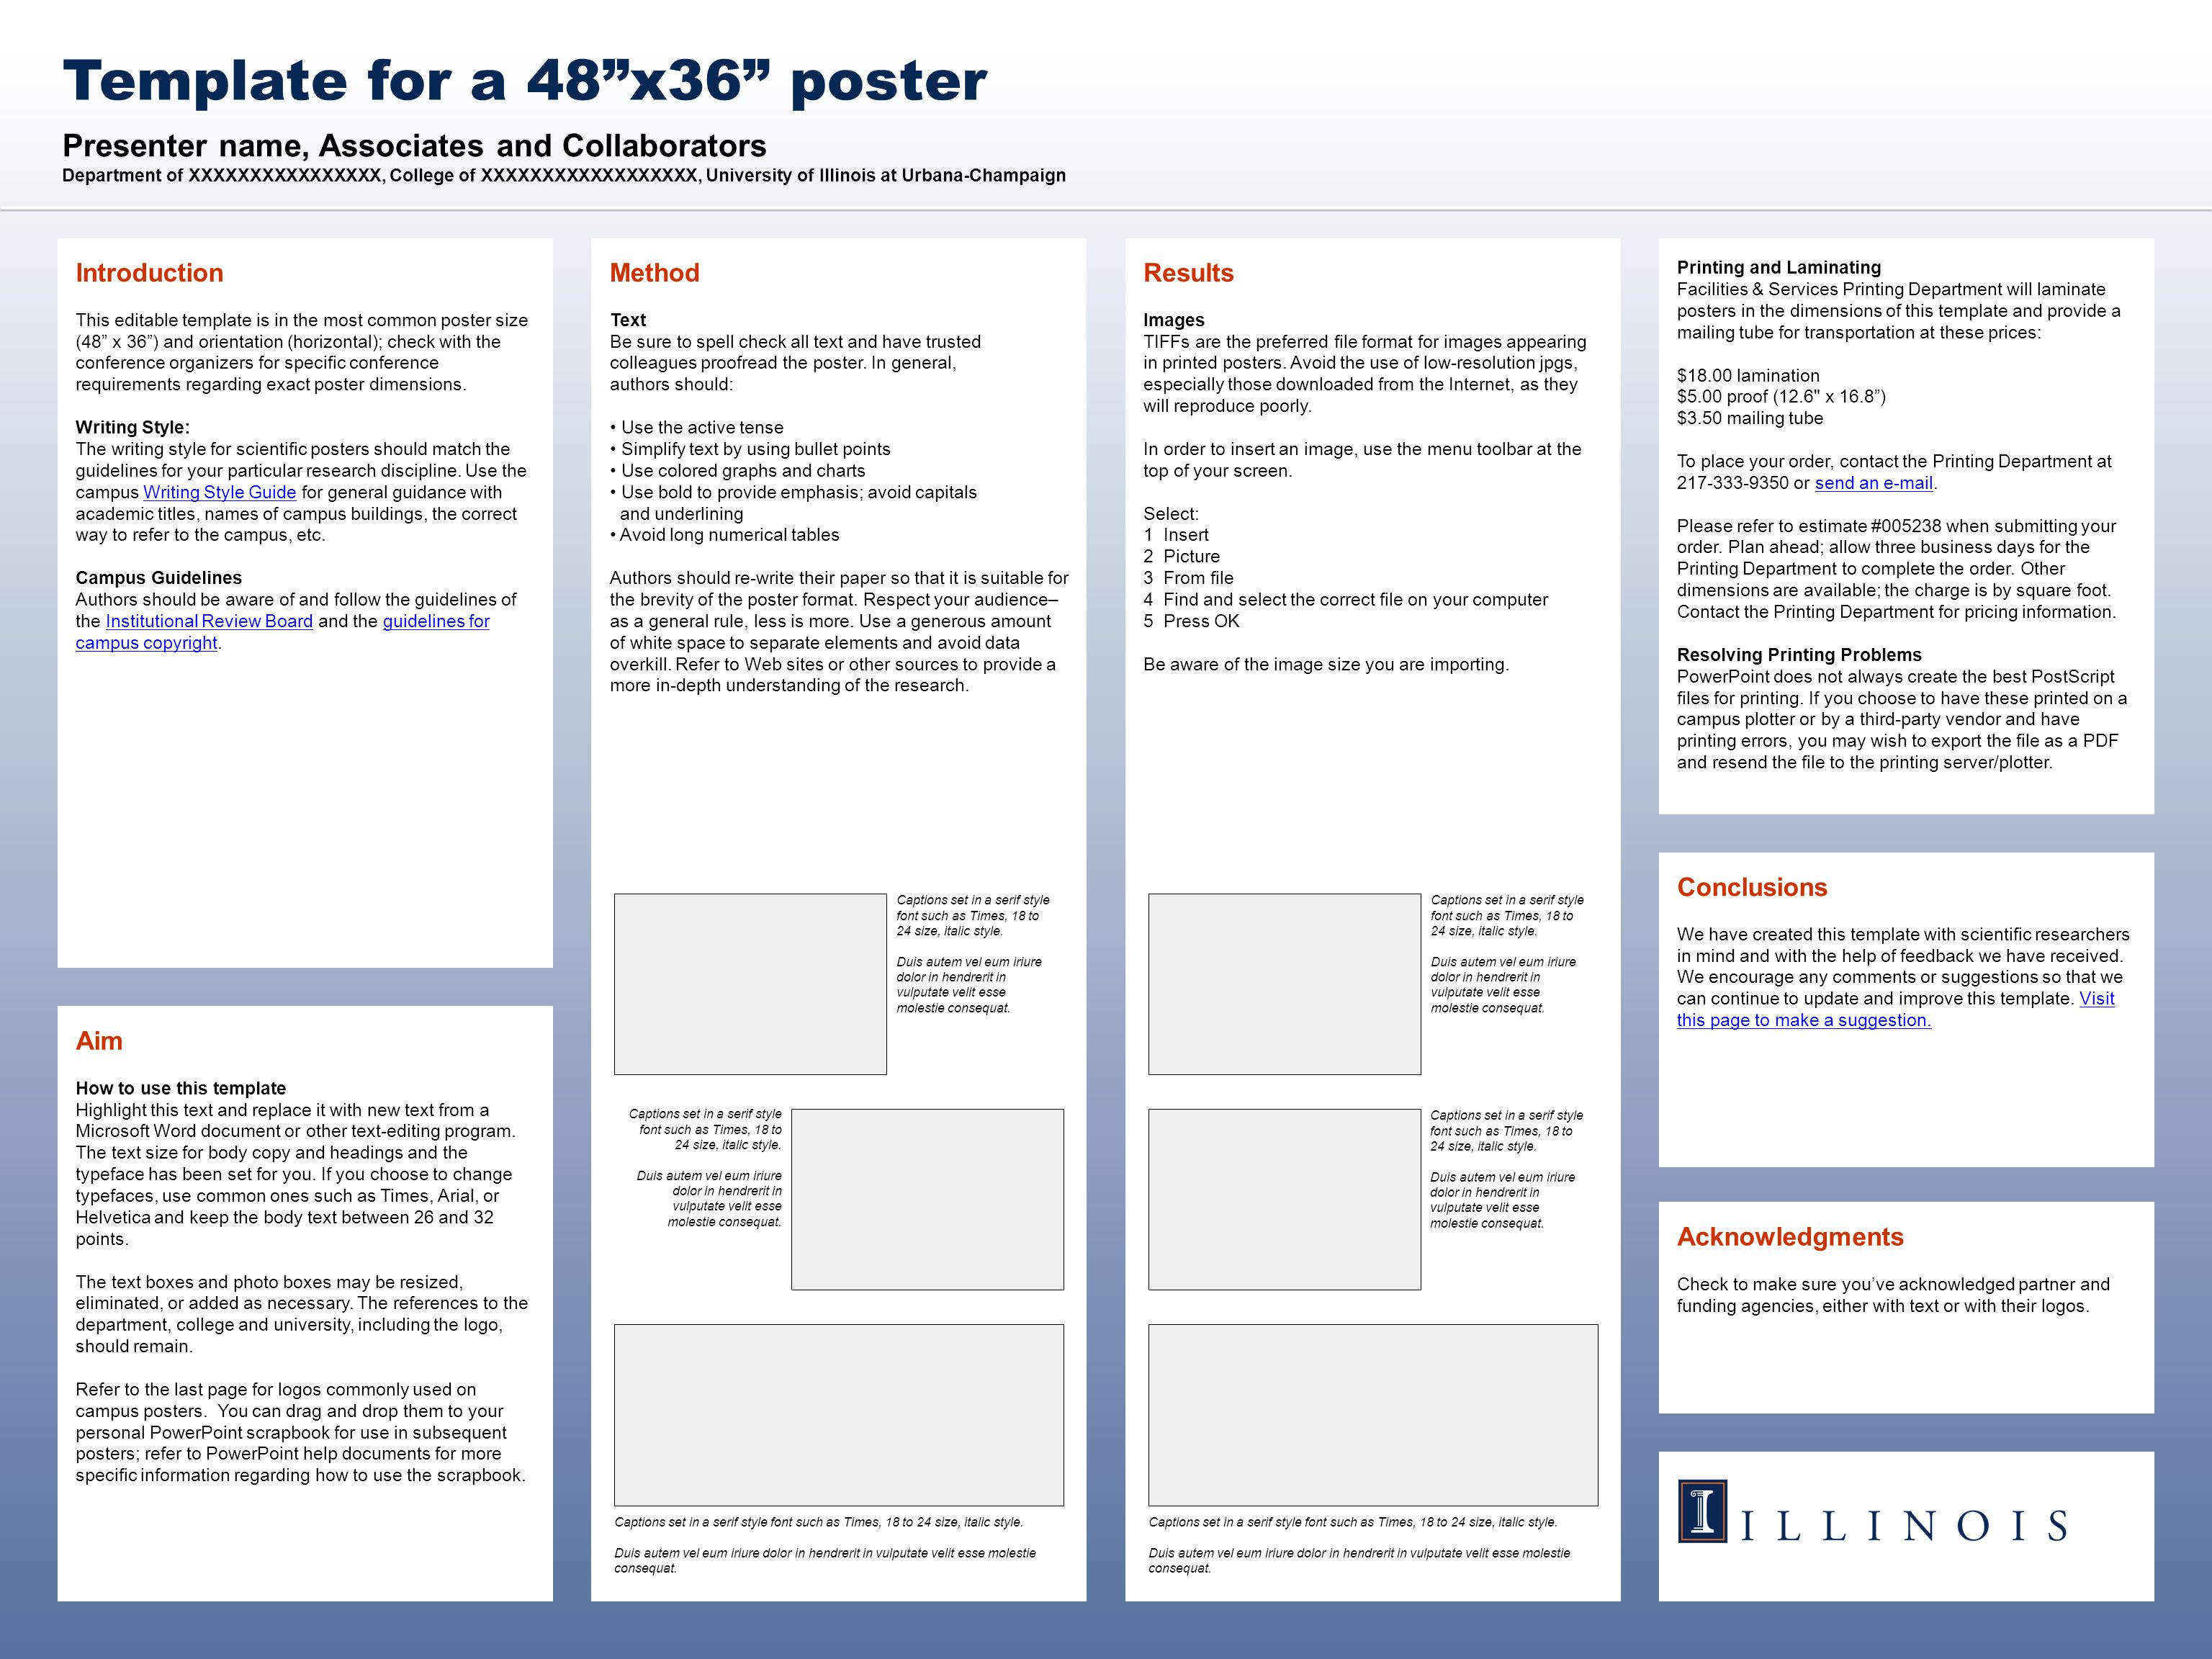 Presenter name, Associates and Collaborators Department of XXXXXXXXXXXXXXXX, College of XXXXXXXXXXXXXXXXXX, University of Illinois at Urbana-Champaign Template for a 48 x36 poster Acknowledgments Check to make sure you’ve acknowledged partner and funding agencies, either with text or with their logos.